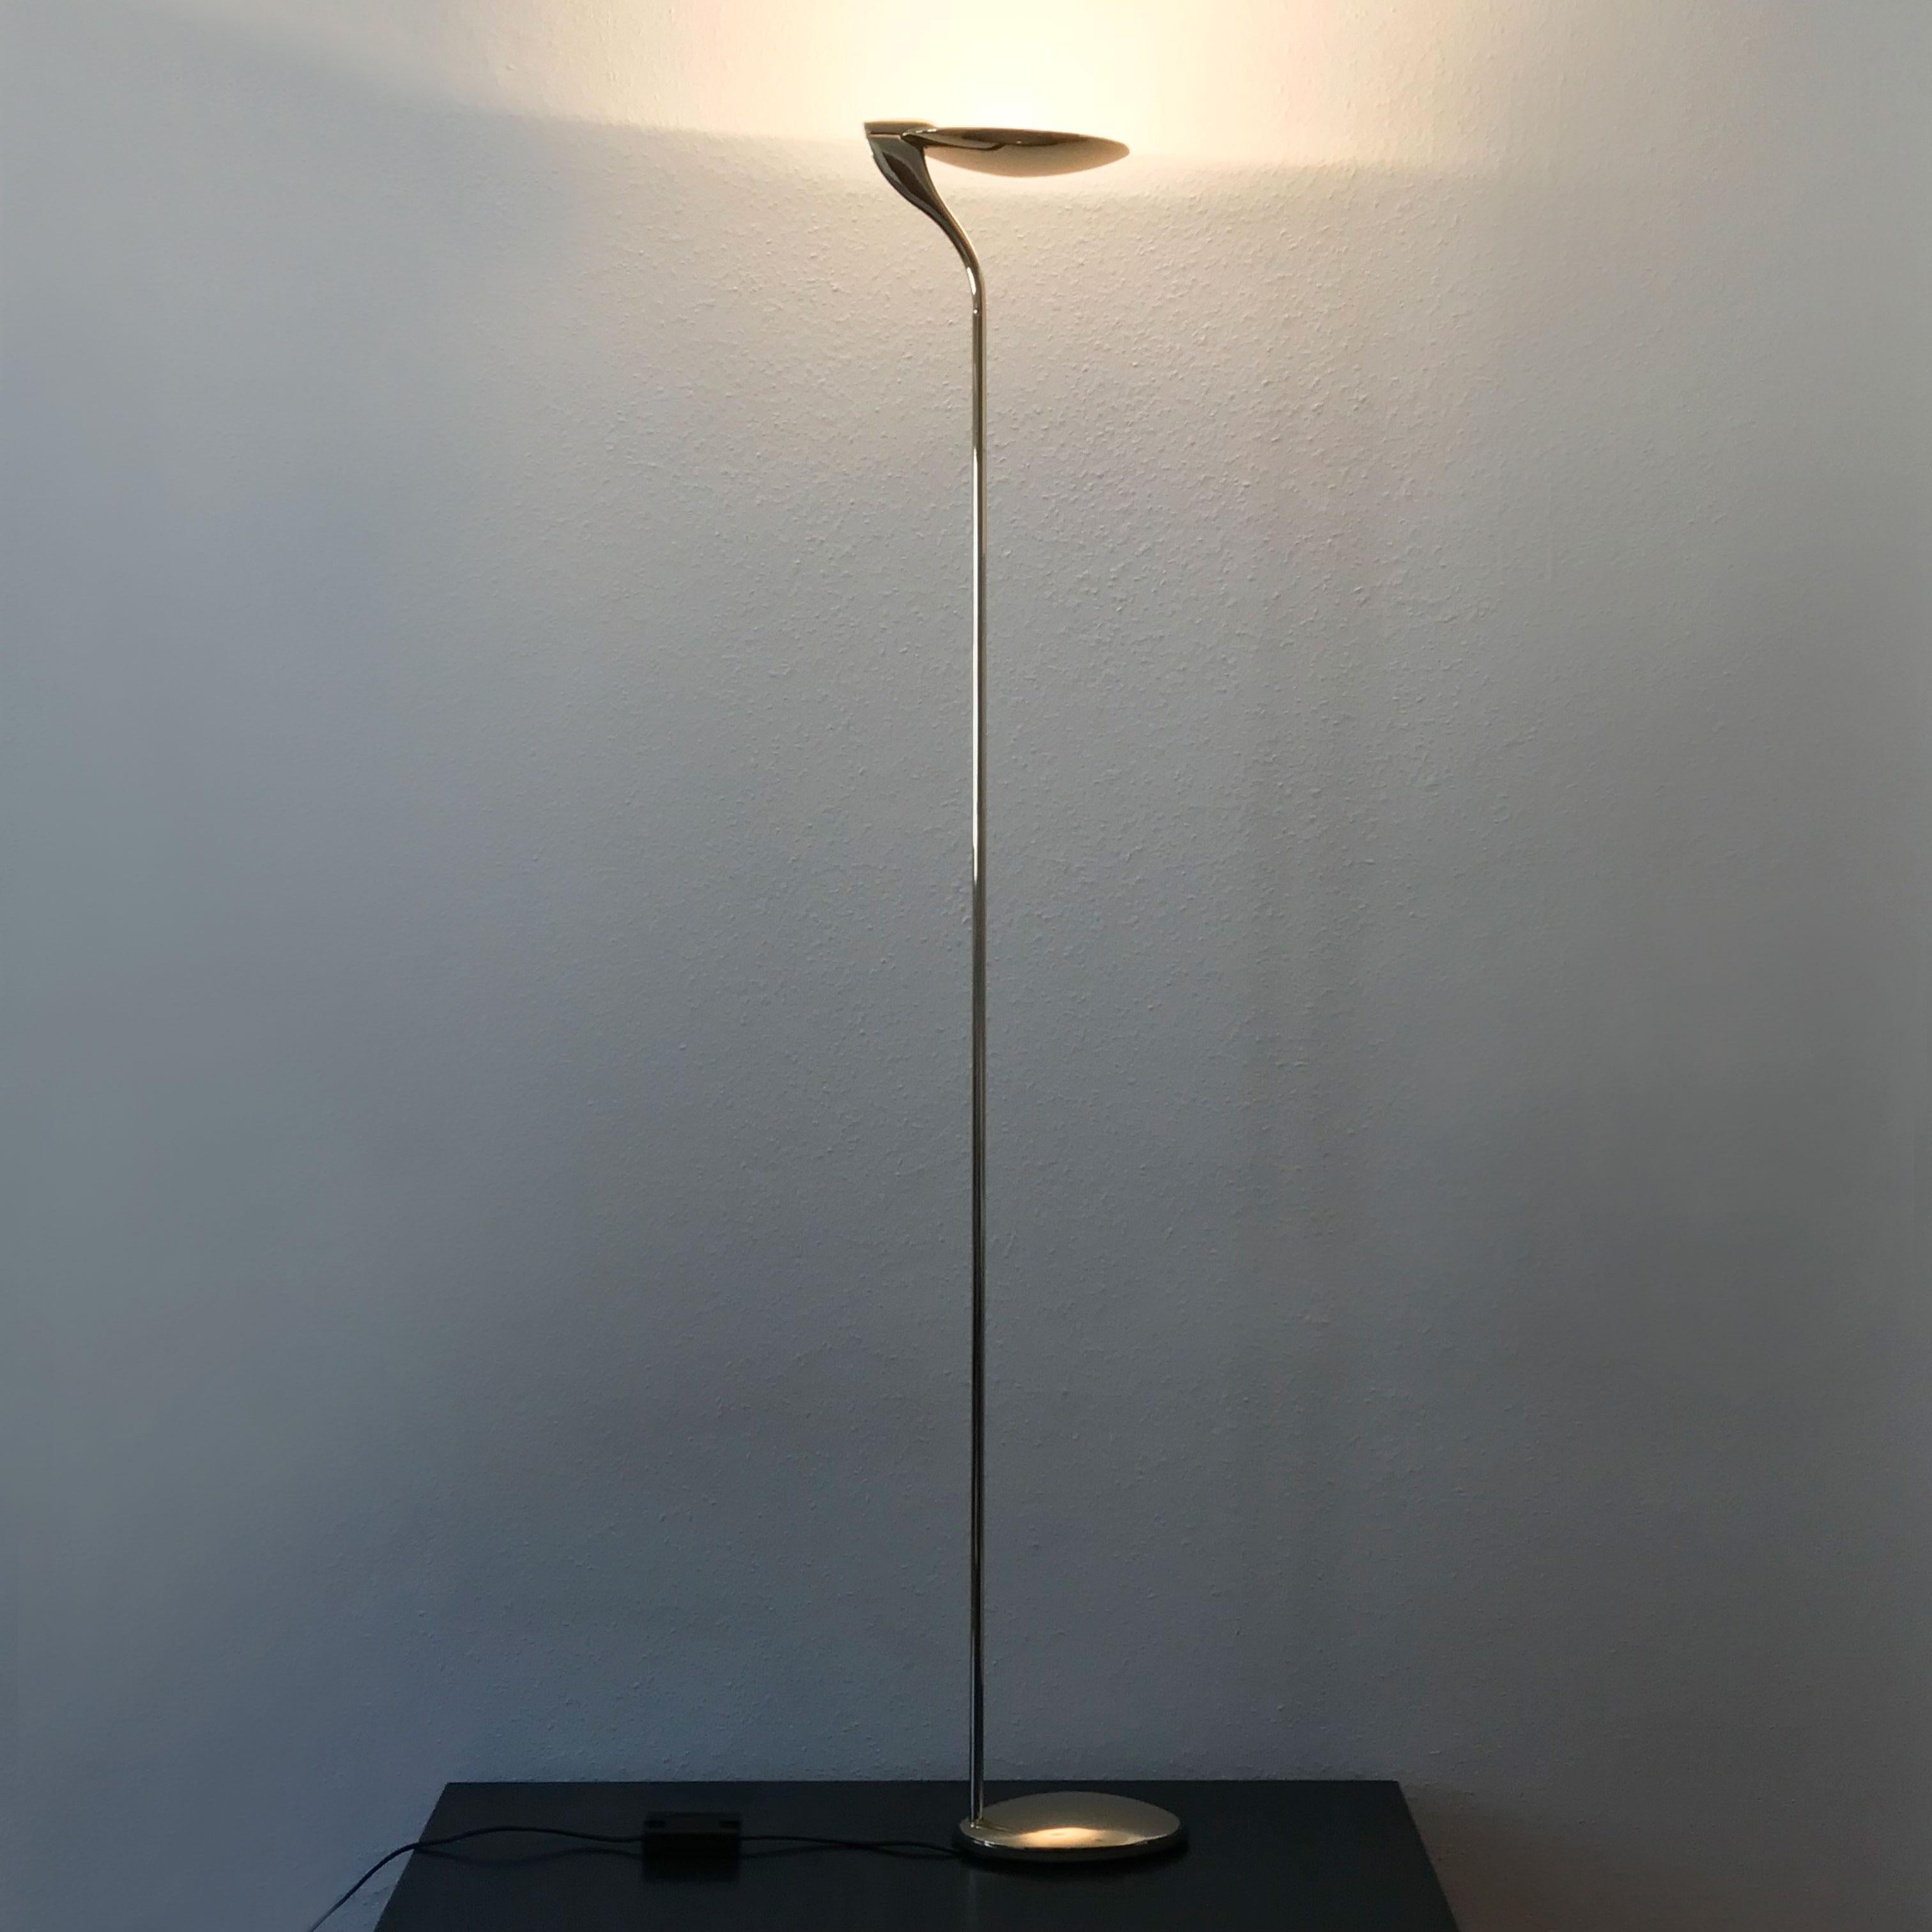 Elegant, pure Minimalist floor lamp uplighter with dimmer. Designed and manufactured probably by Florian Schulz, 1980s, Germany.

Executed in polished brass, needs an halogen bulb, is wired and in working condition. 

Condition:
Good original